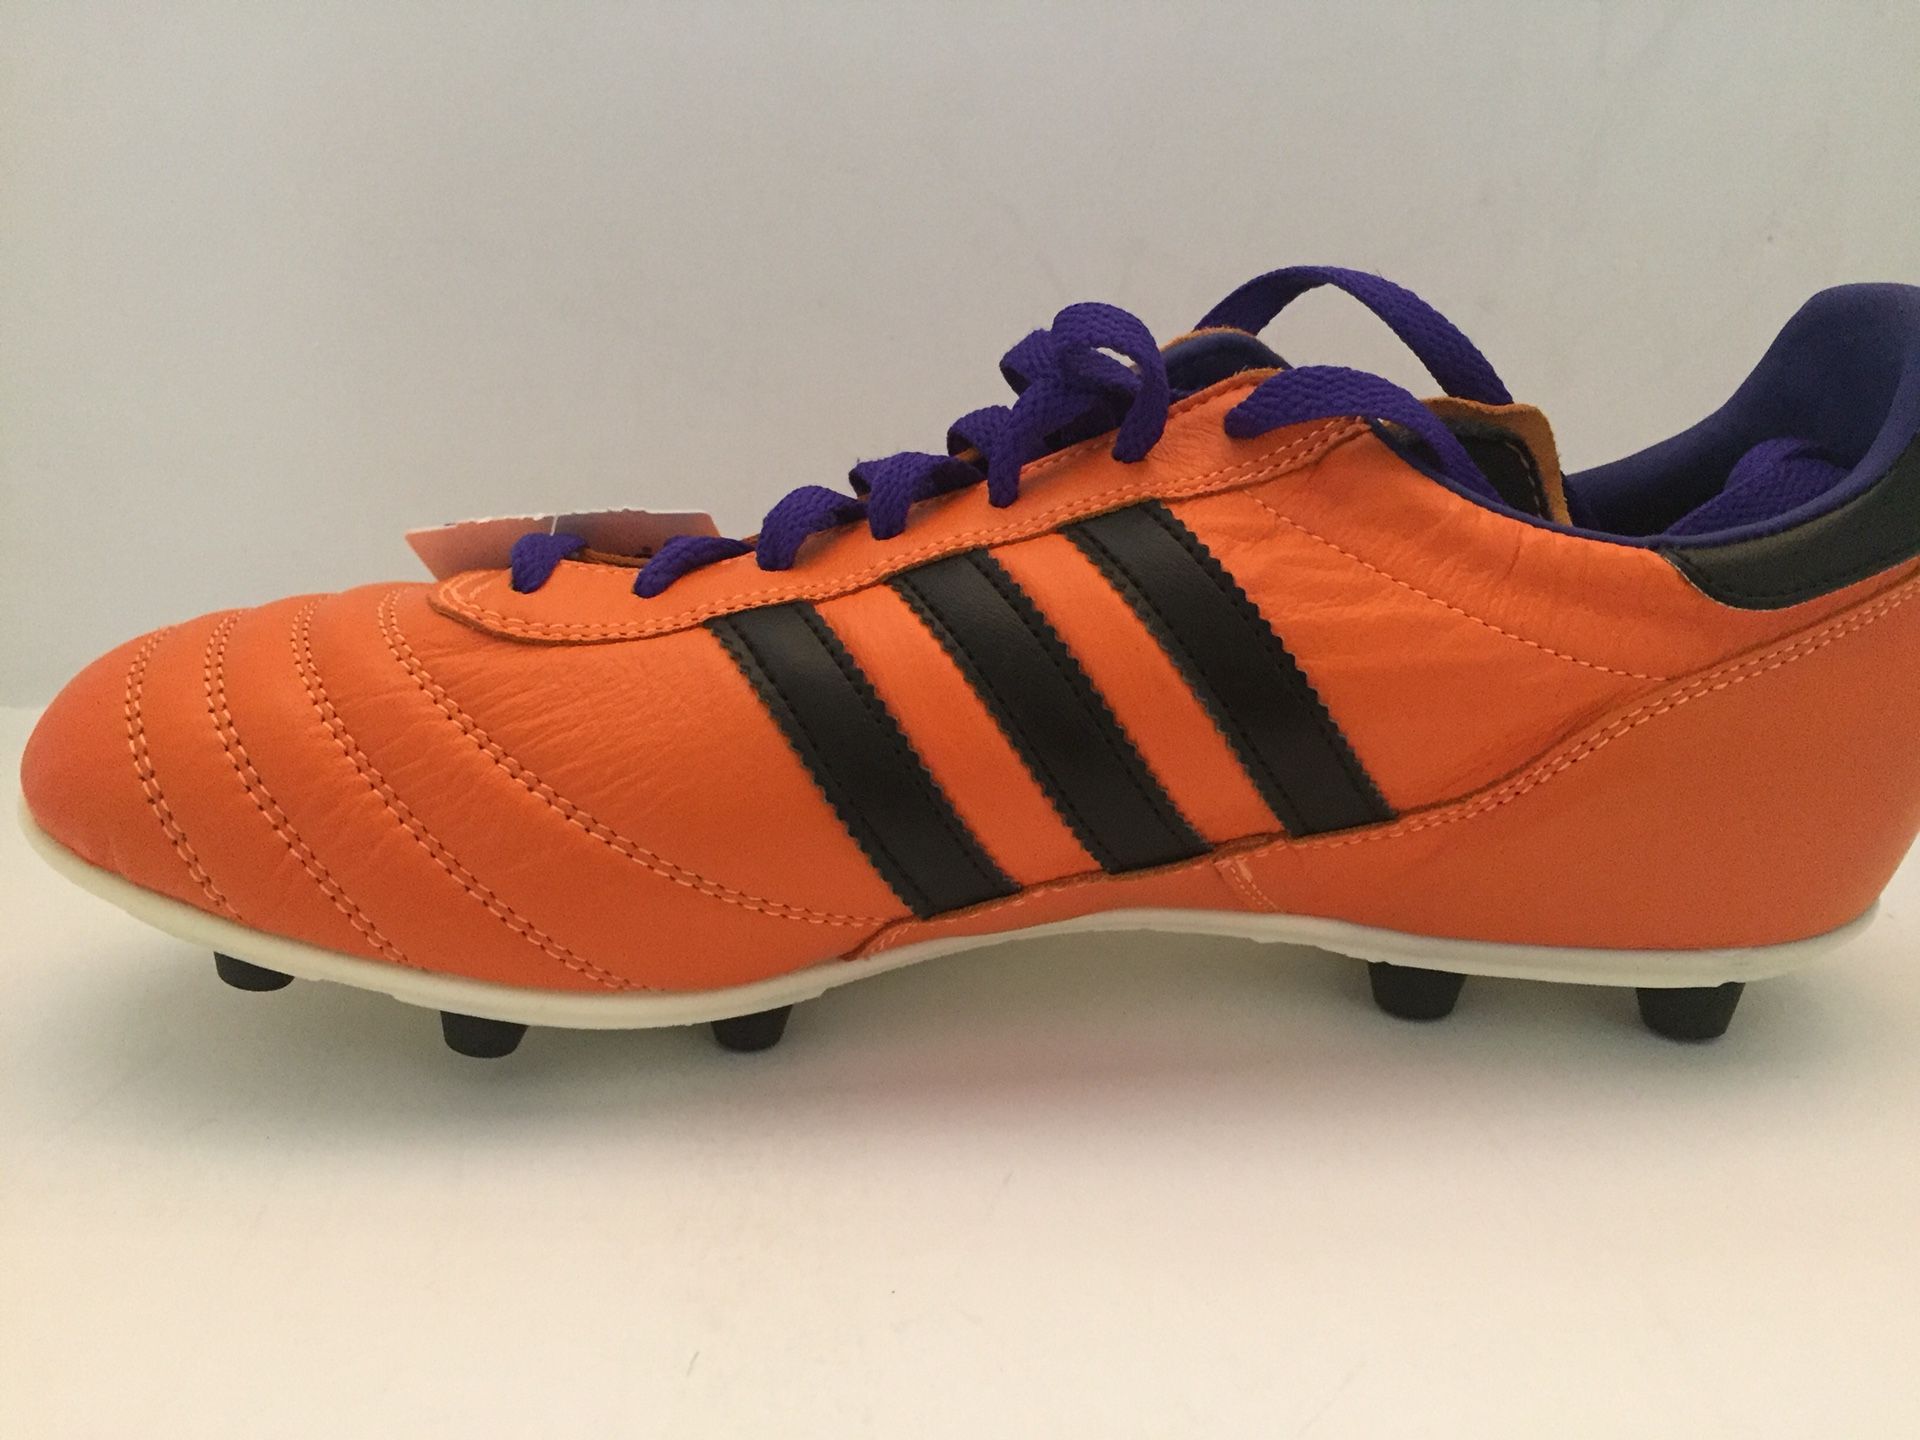 God kans Graag gedaan New adidas copa Mundial Kangaroo Leather soccer cleats size 9.5 for Sale in  La Verne, CA - OfferUp